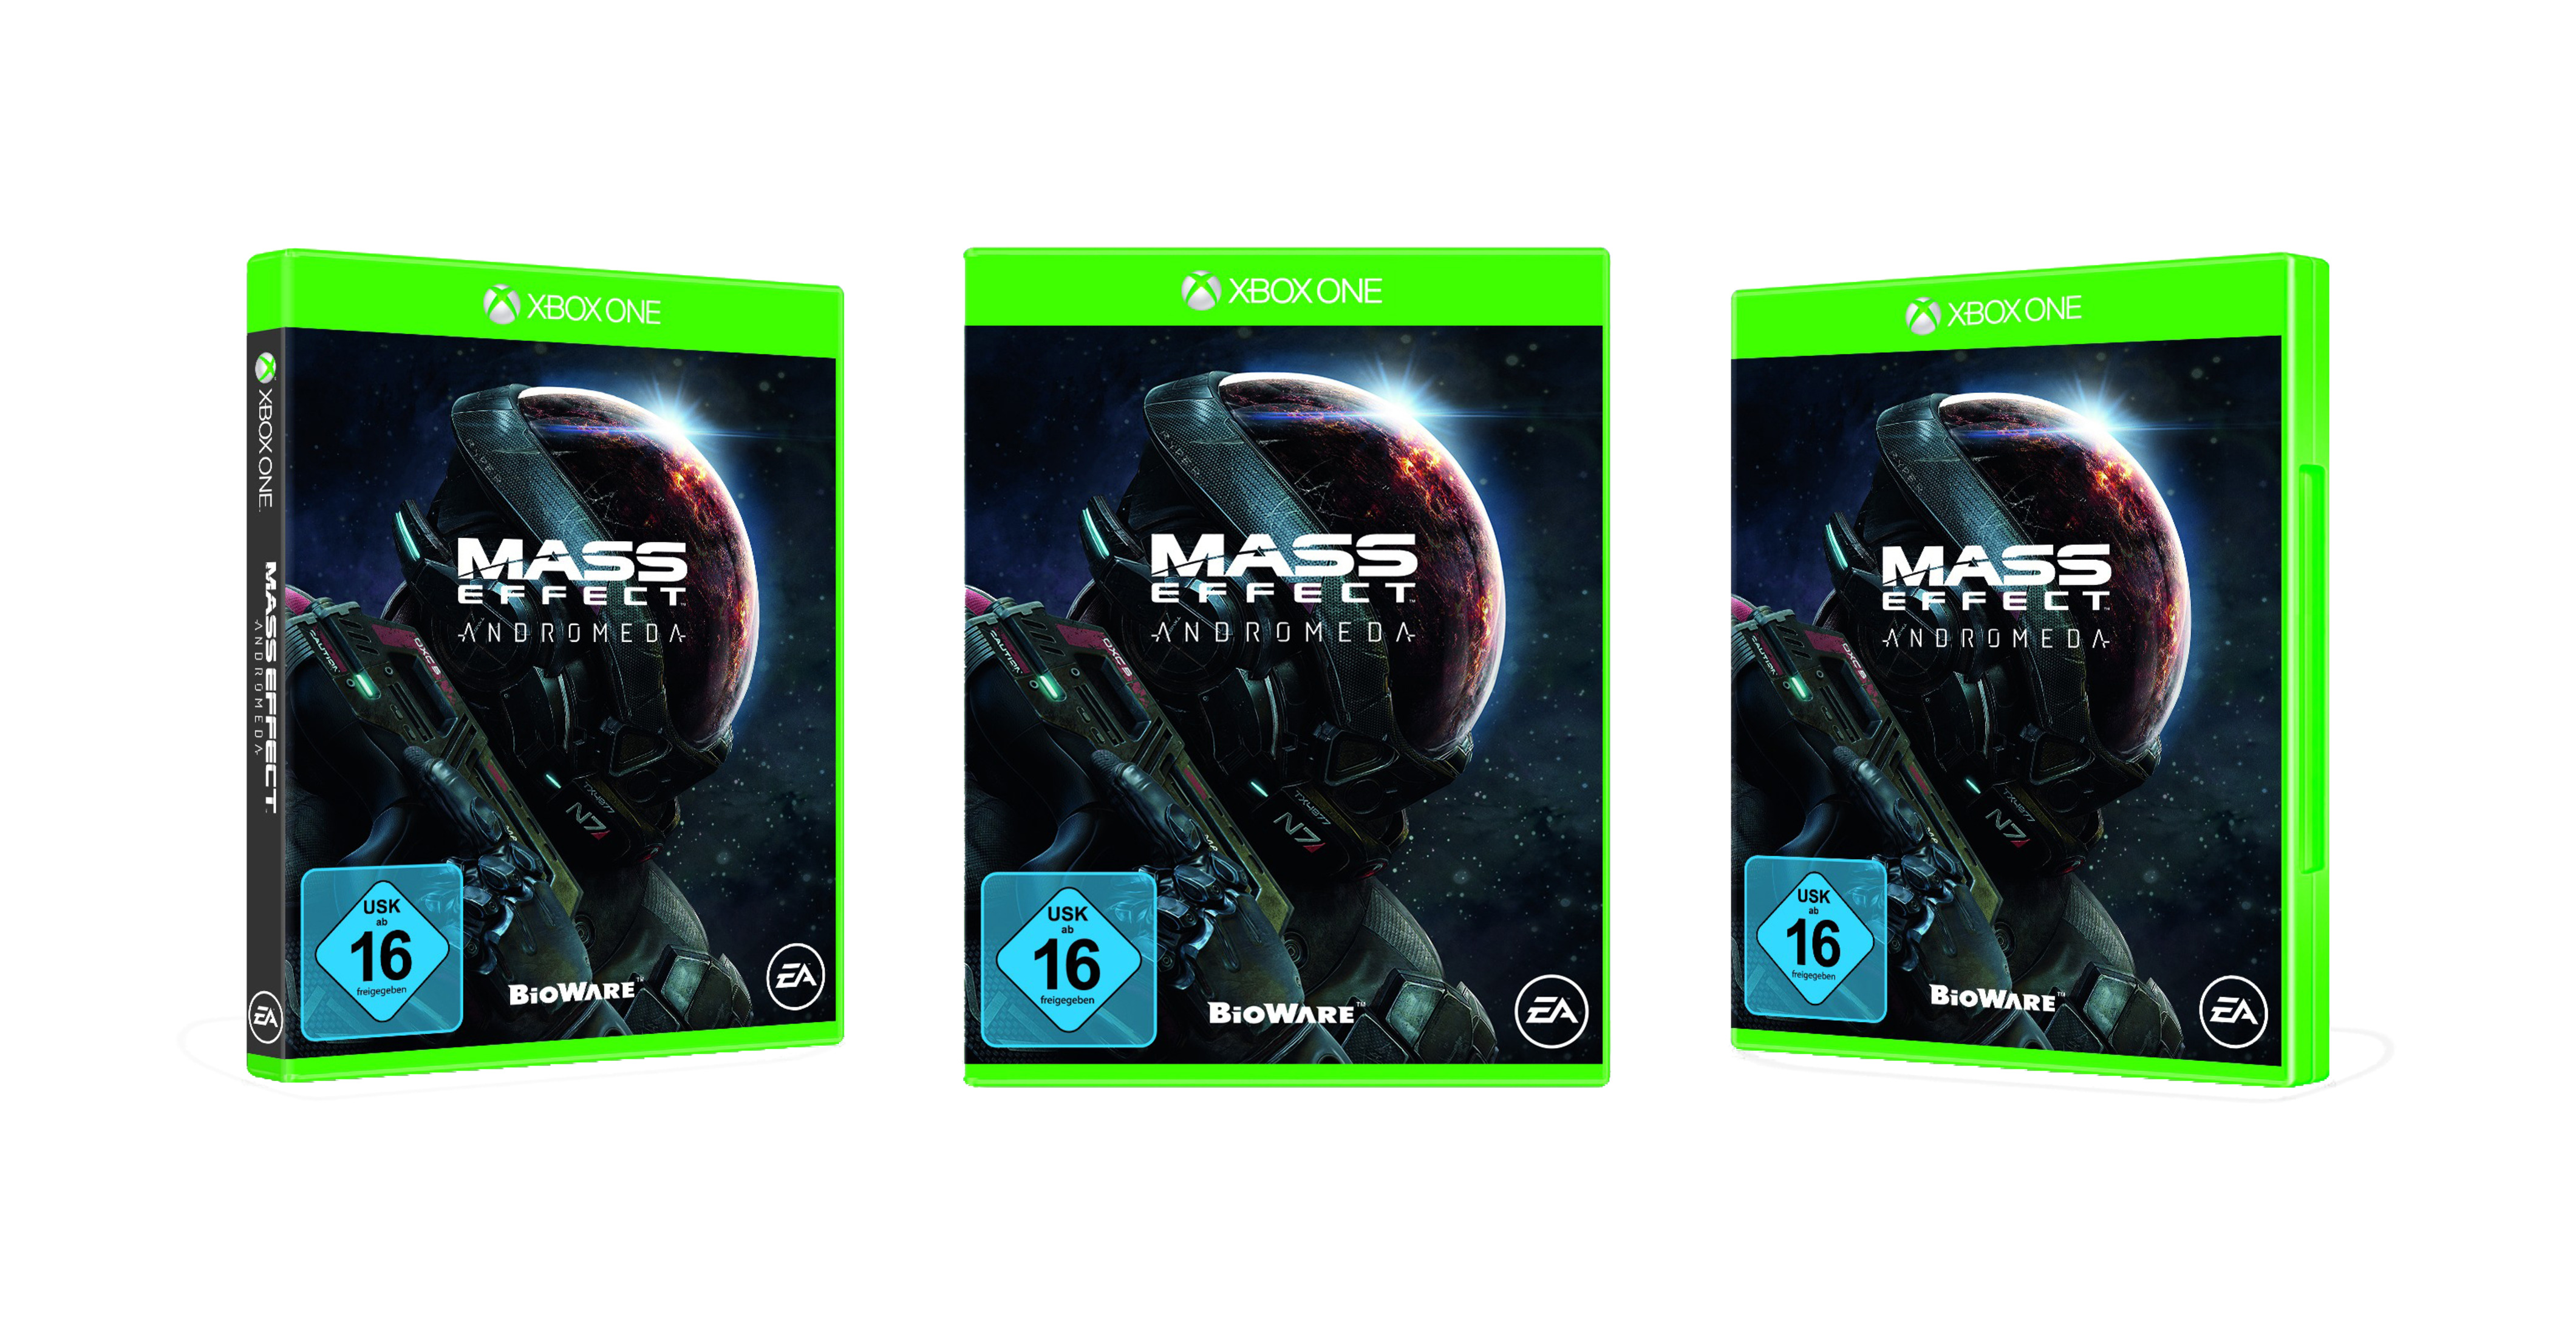 - [Xbox Mass One] Andromeda Effect